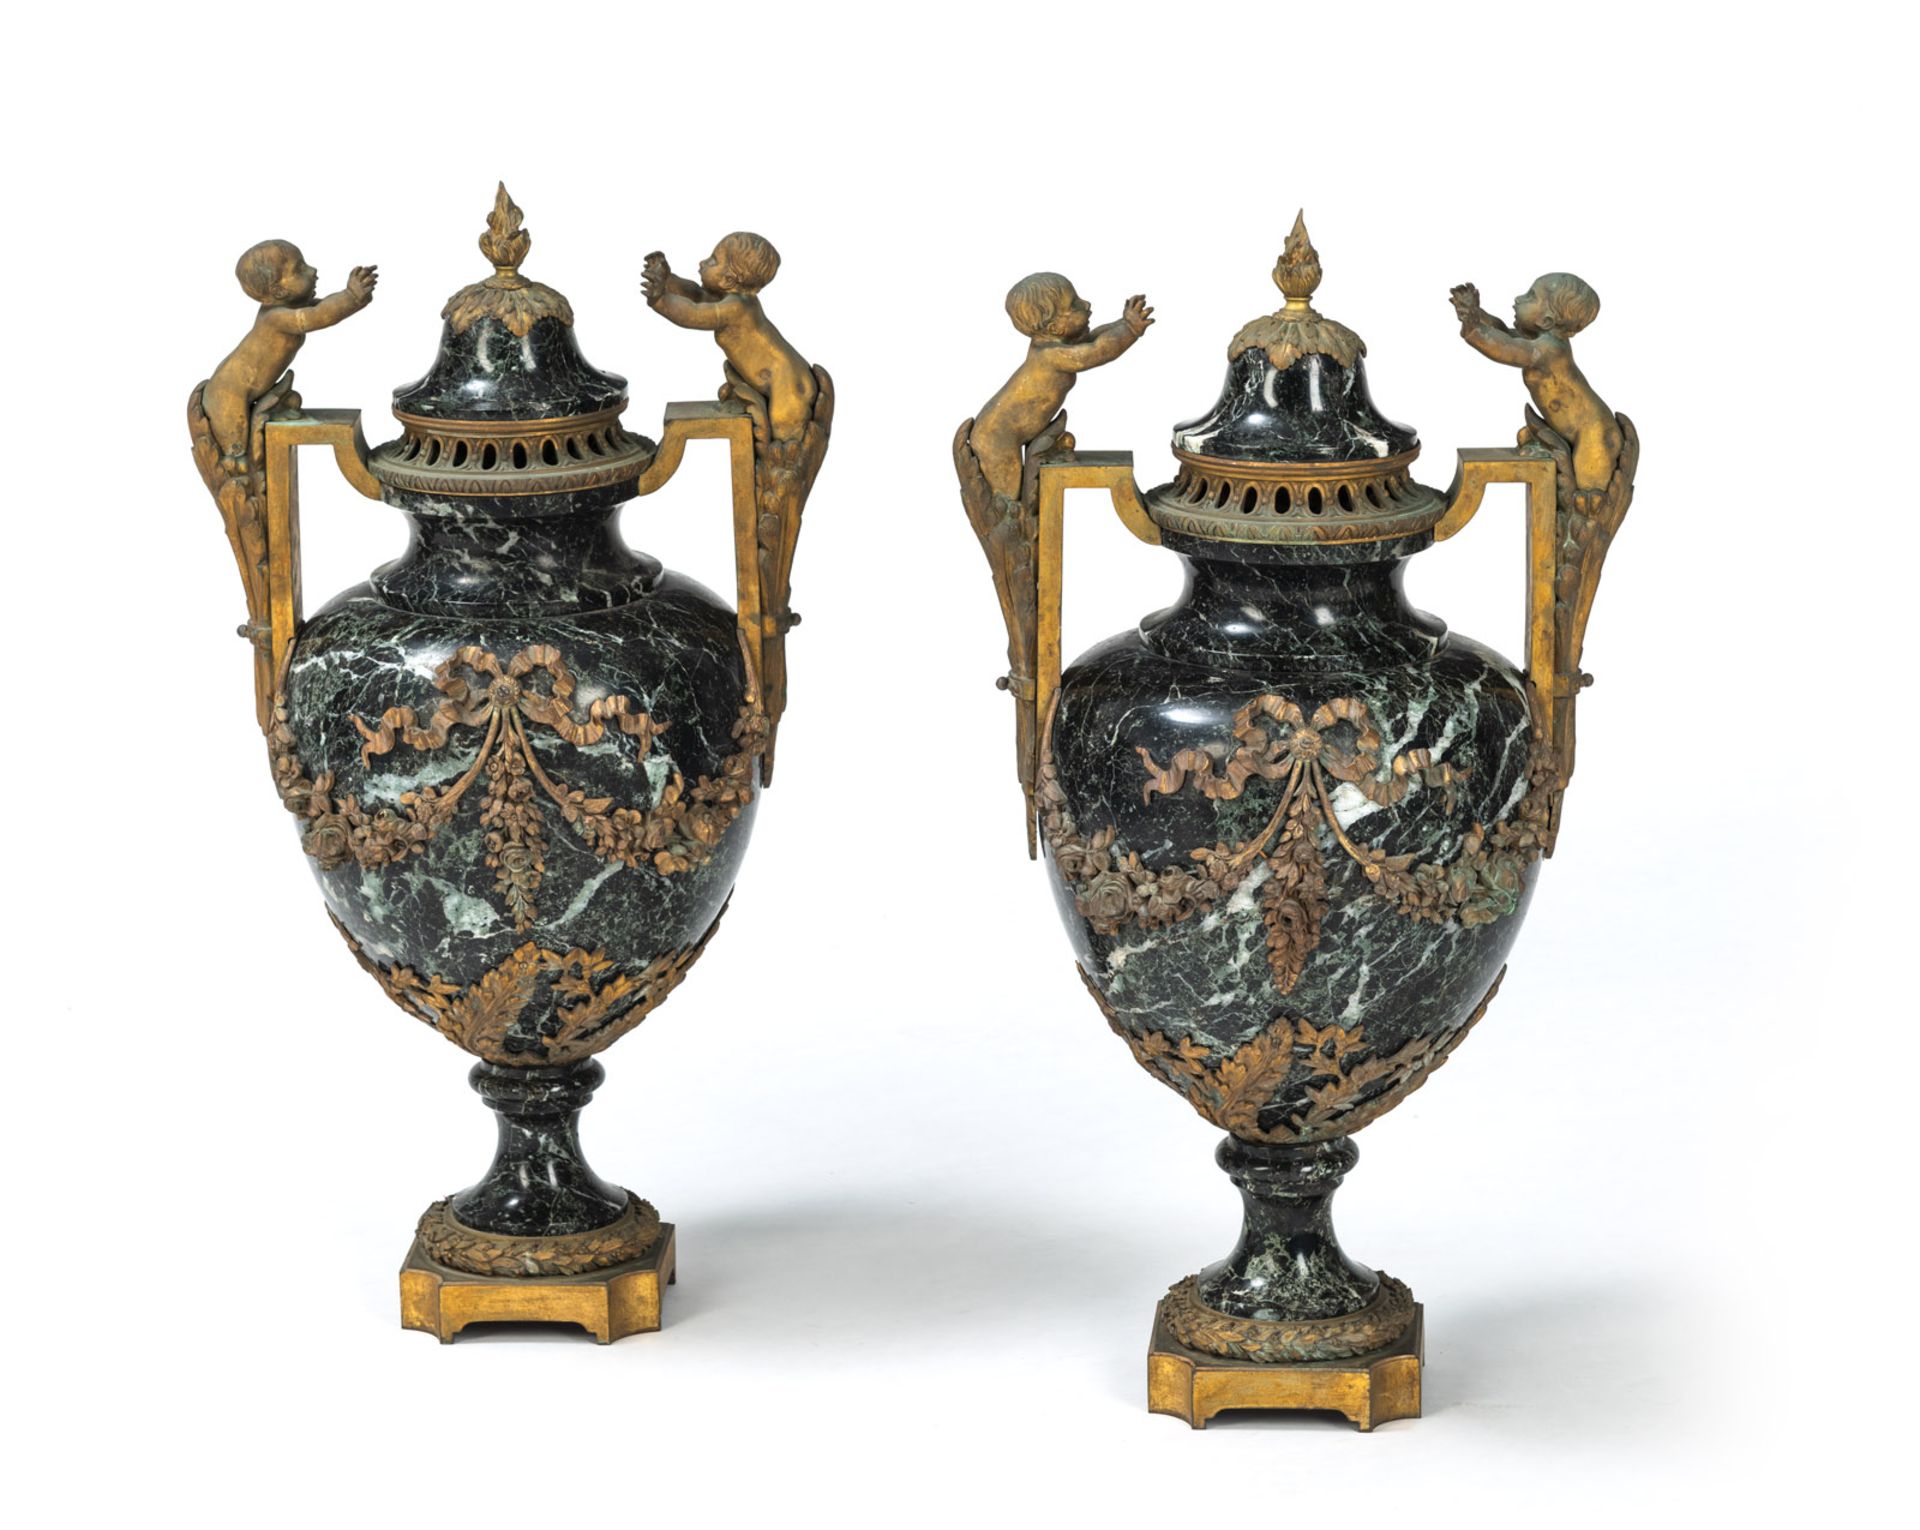 A PAIR OF FRENCH ORMOLU MOUNTED VERT DE MER MARBLE TWO-HANDLED VASES